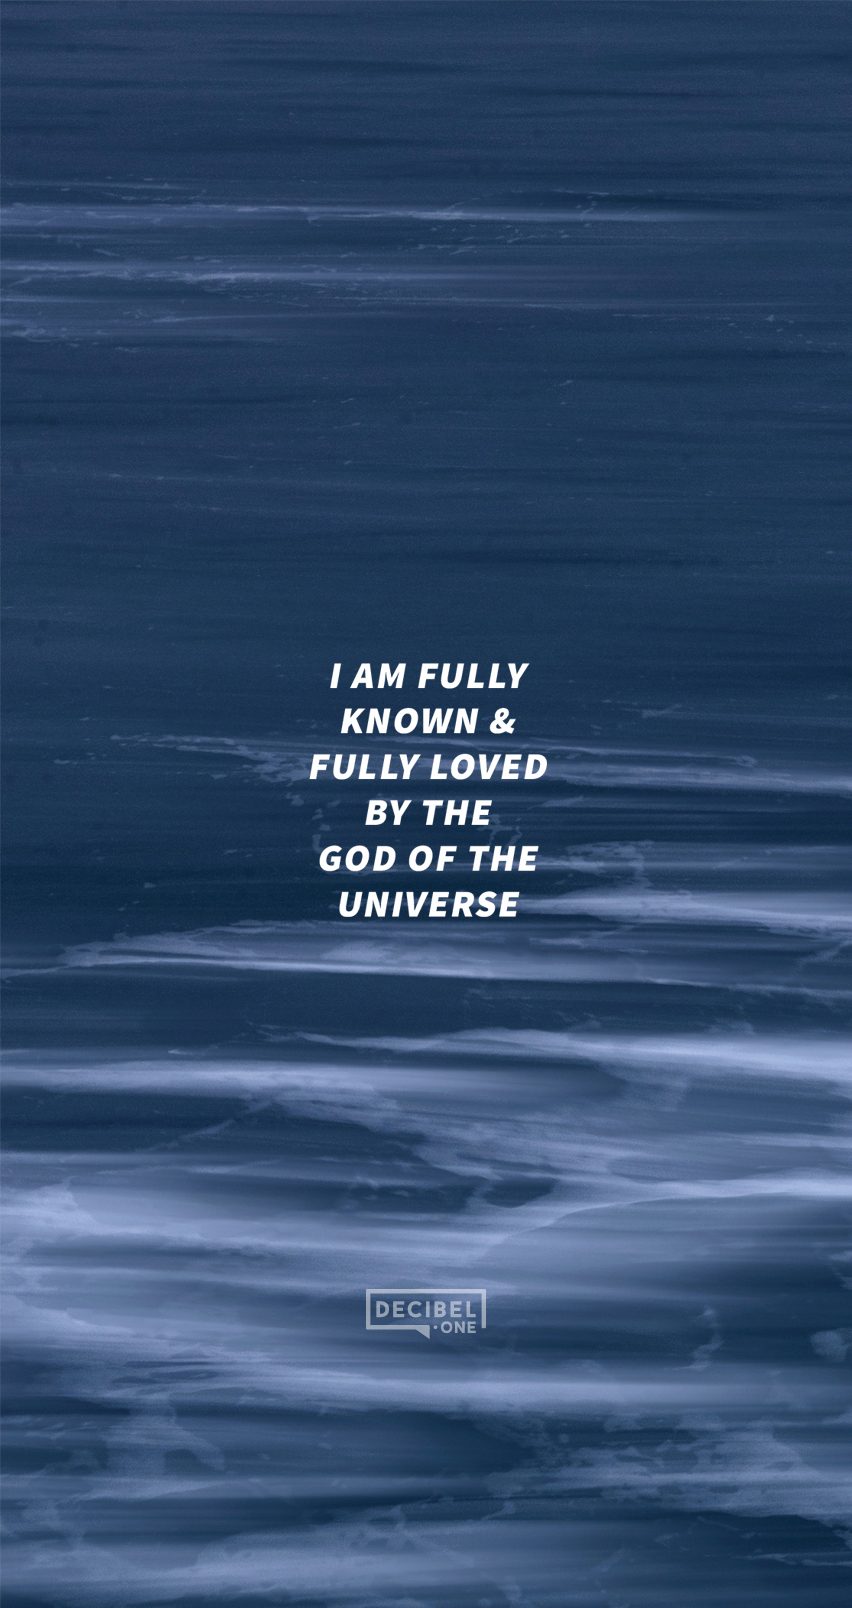 I am fully known & fully loved by the God of the universe